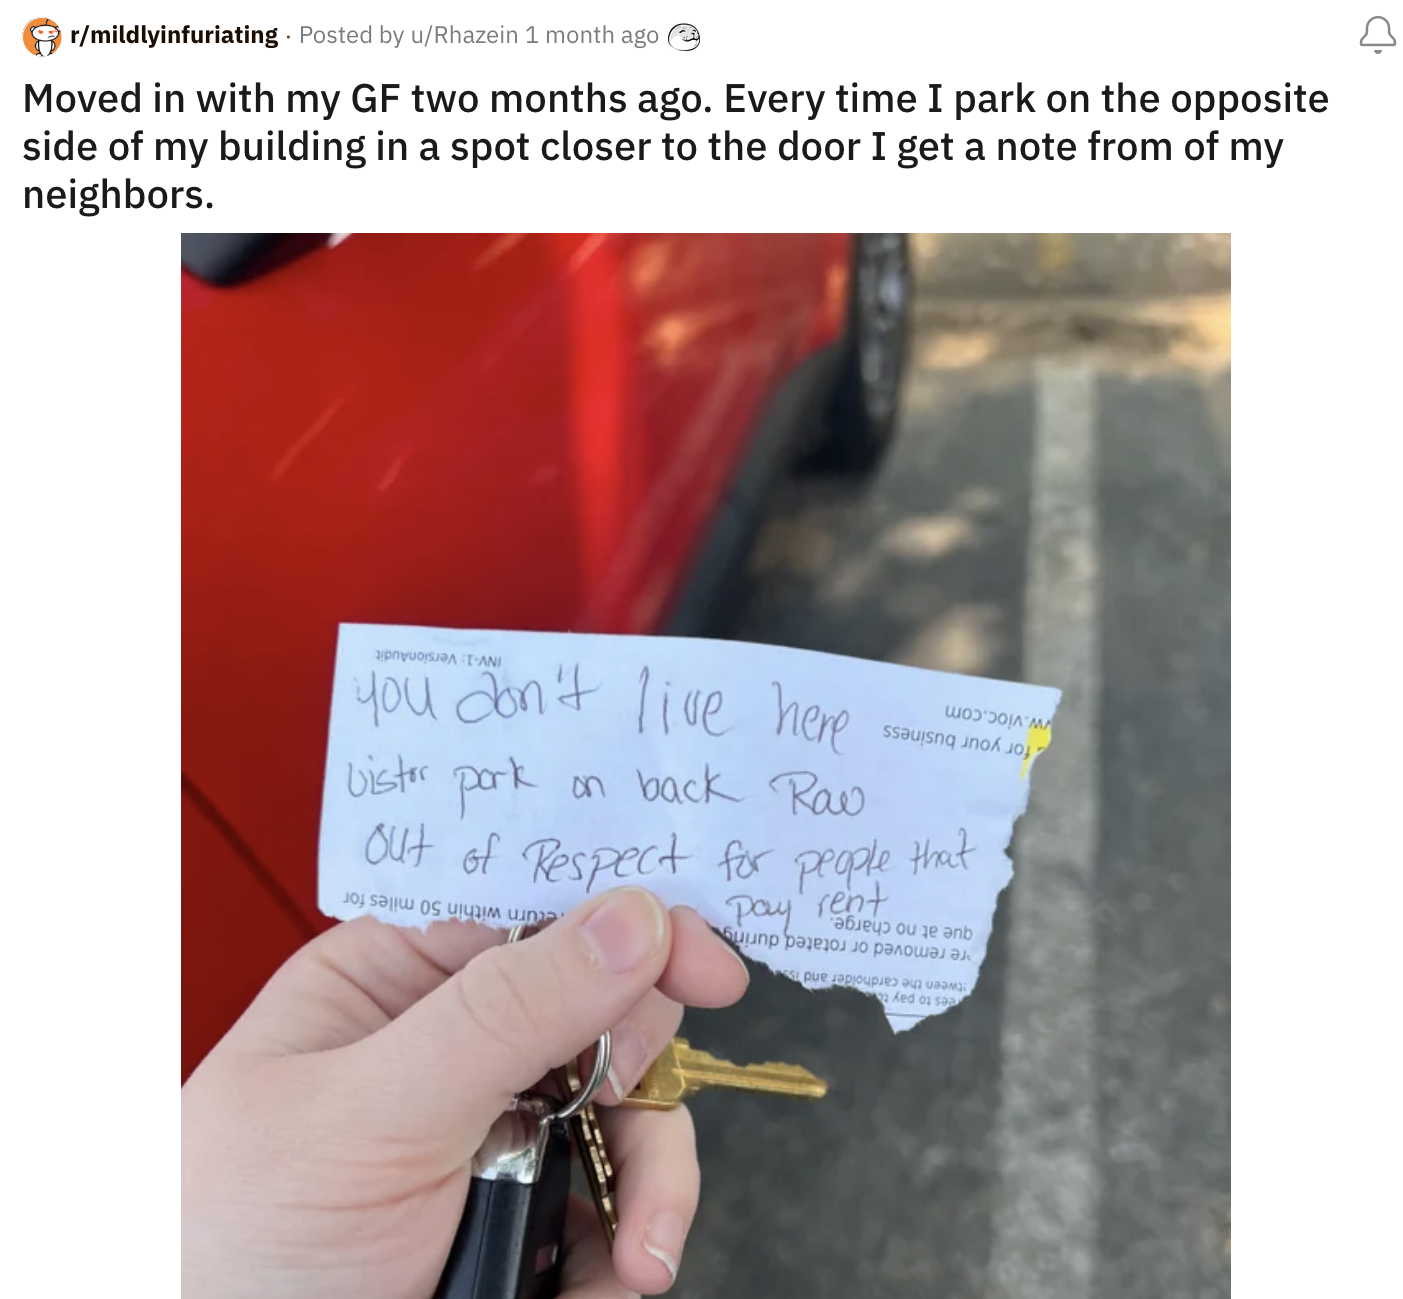 A man holding a note left by a neighbor